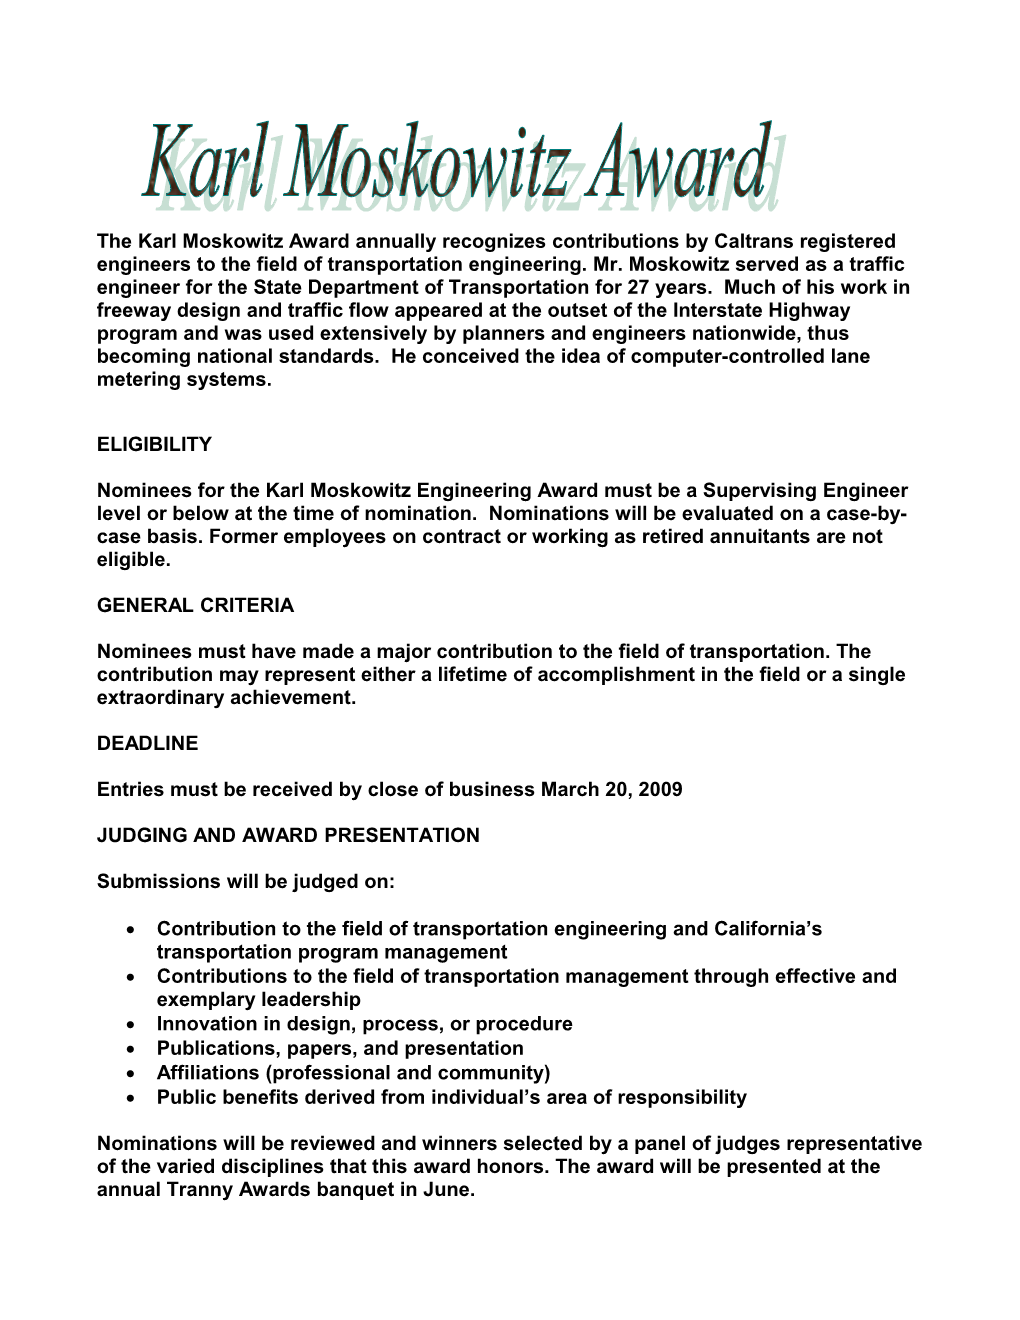 The Karl Moskowitz Award Annually Recognizes Contributions by Caltrans Registered Engineers